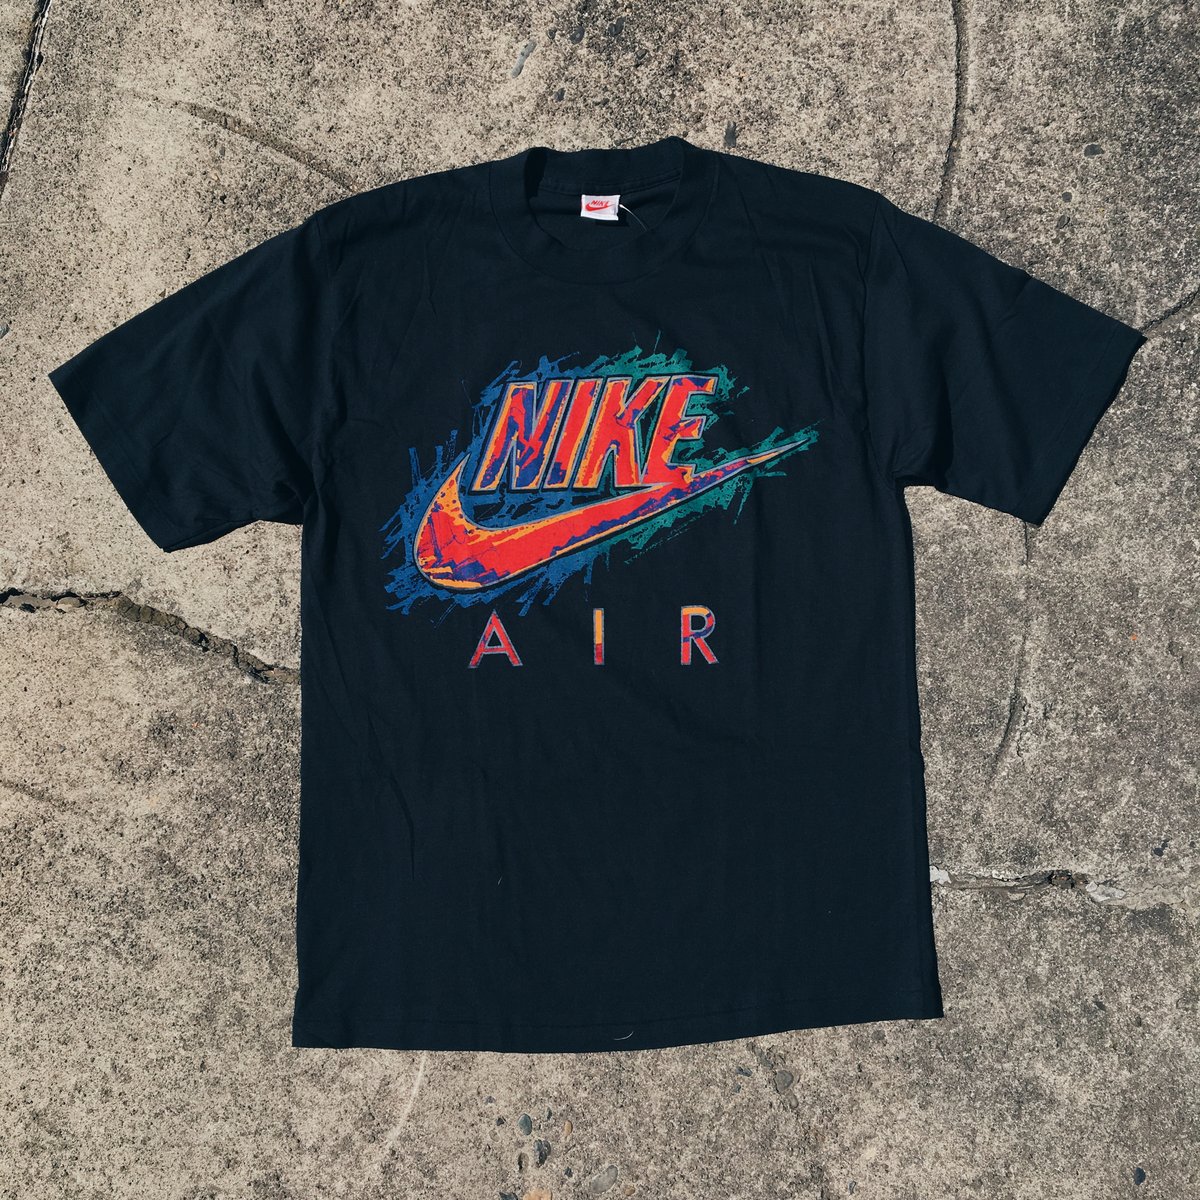 Products | Nike Tees Are The Shit.